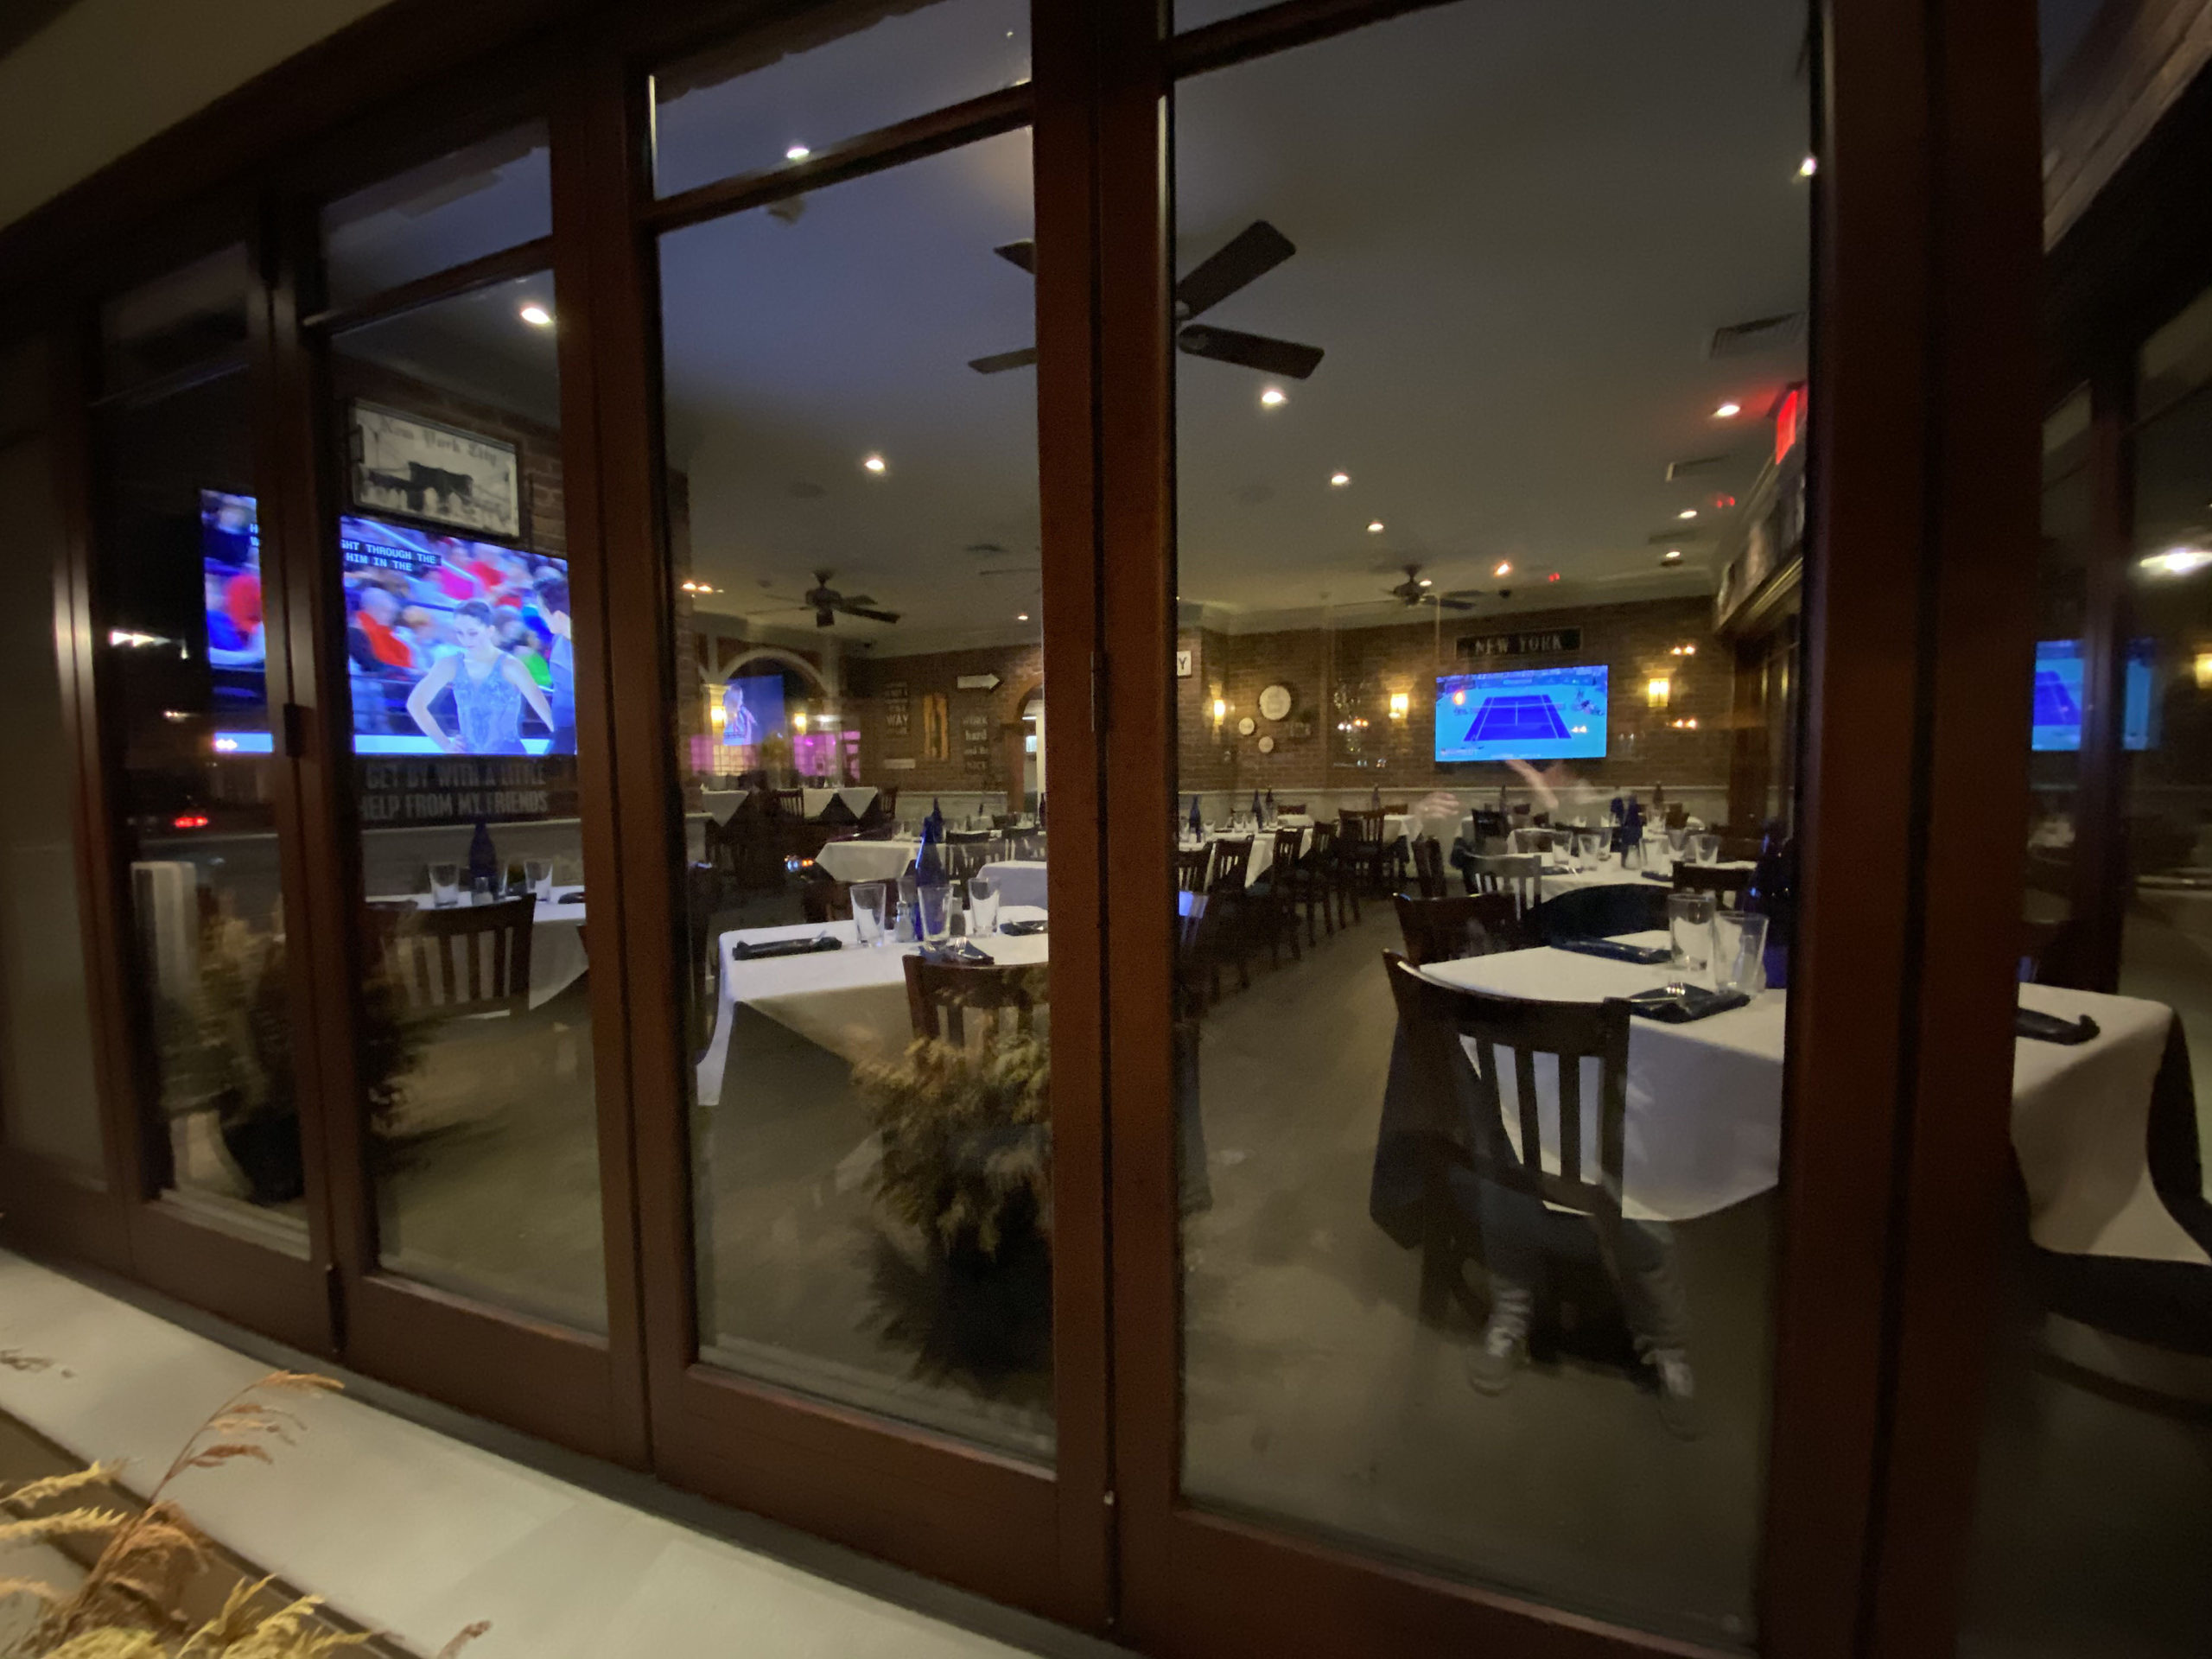 Jobs Lane Ristorante in Southampton Village was closed to diners on Sunday evening, but offering takeout.   DANA SHAW